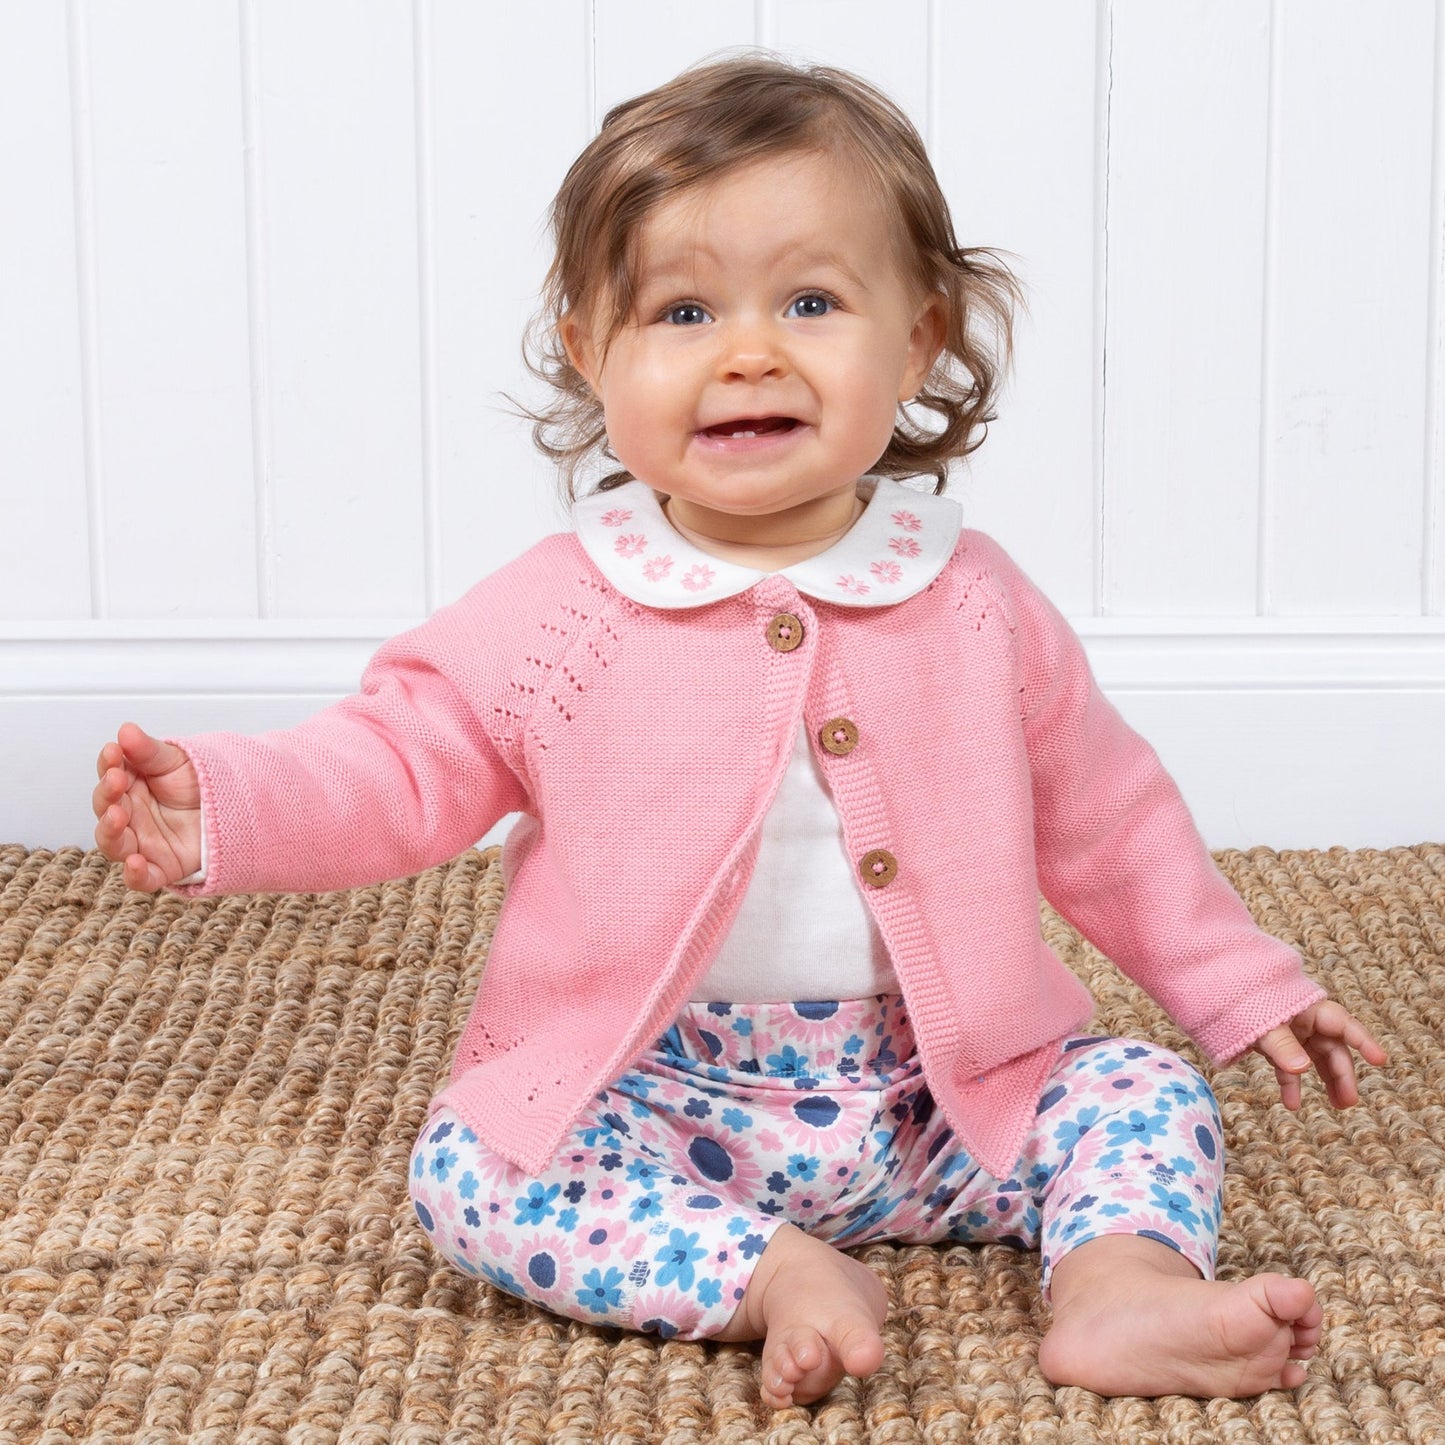 Baby wearing pink cardigan with top and trousers